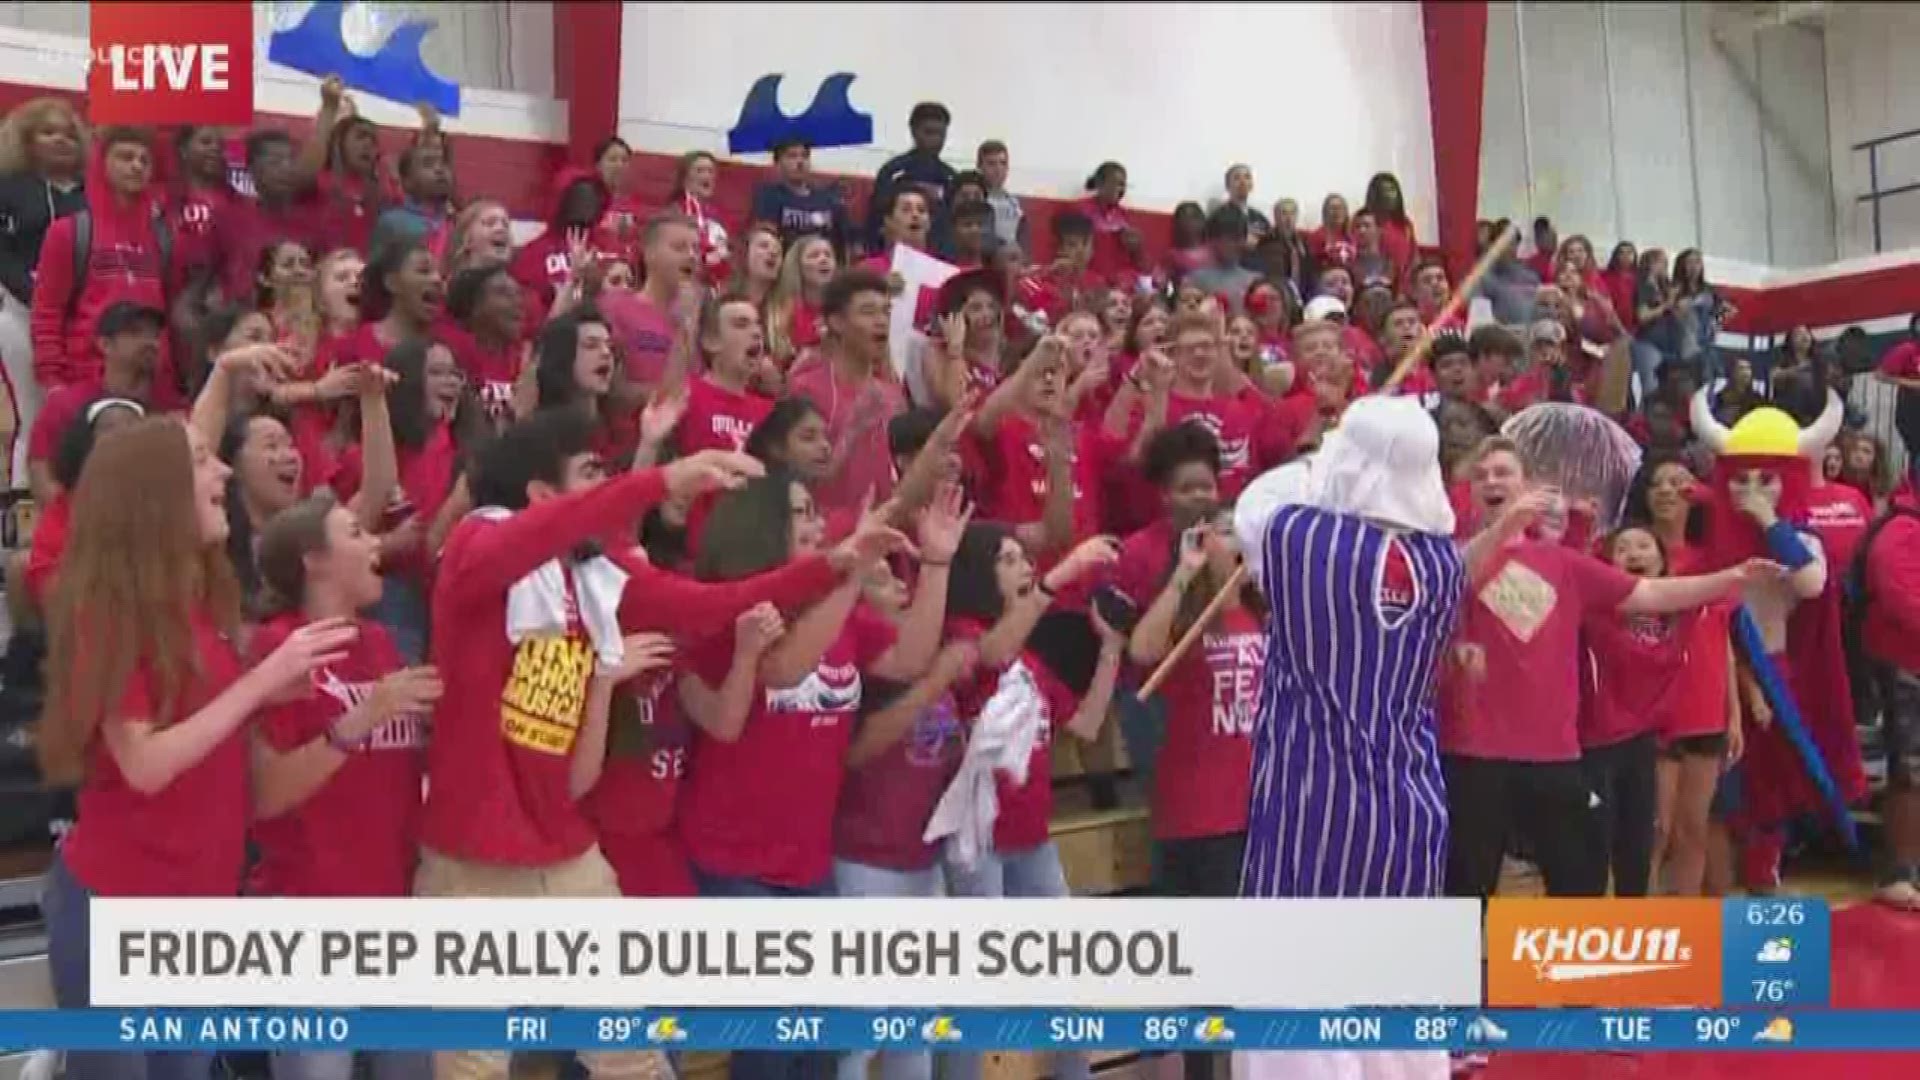 Check out what the students call the "Parting of the Red Sea" at Friday morning's pep rally at Dulles High School in Missouri City.